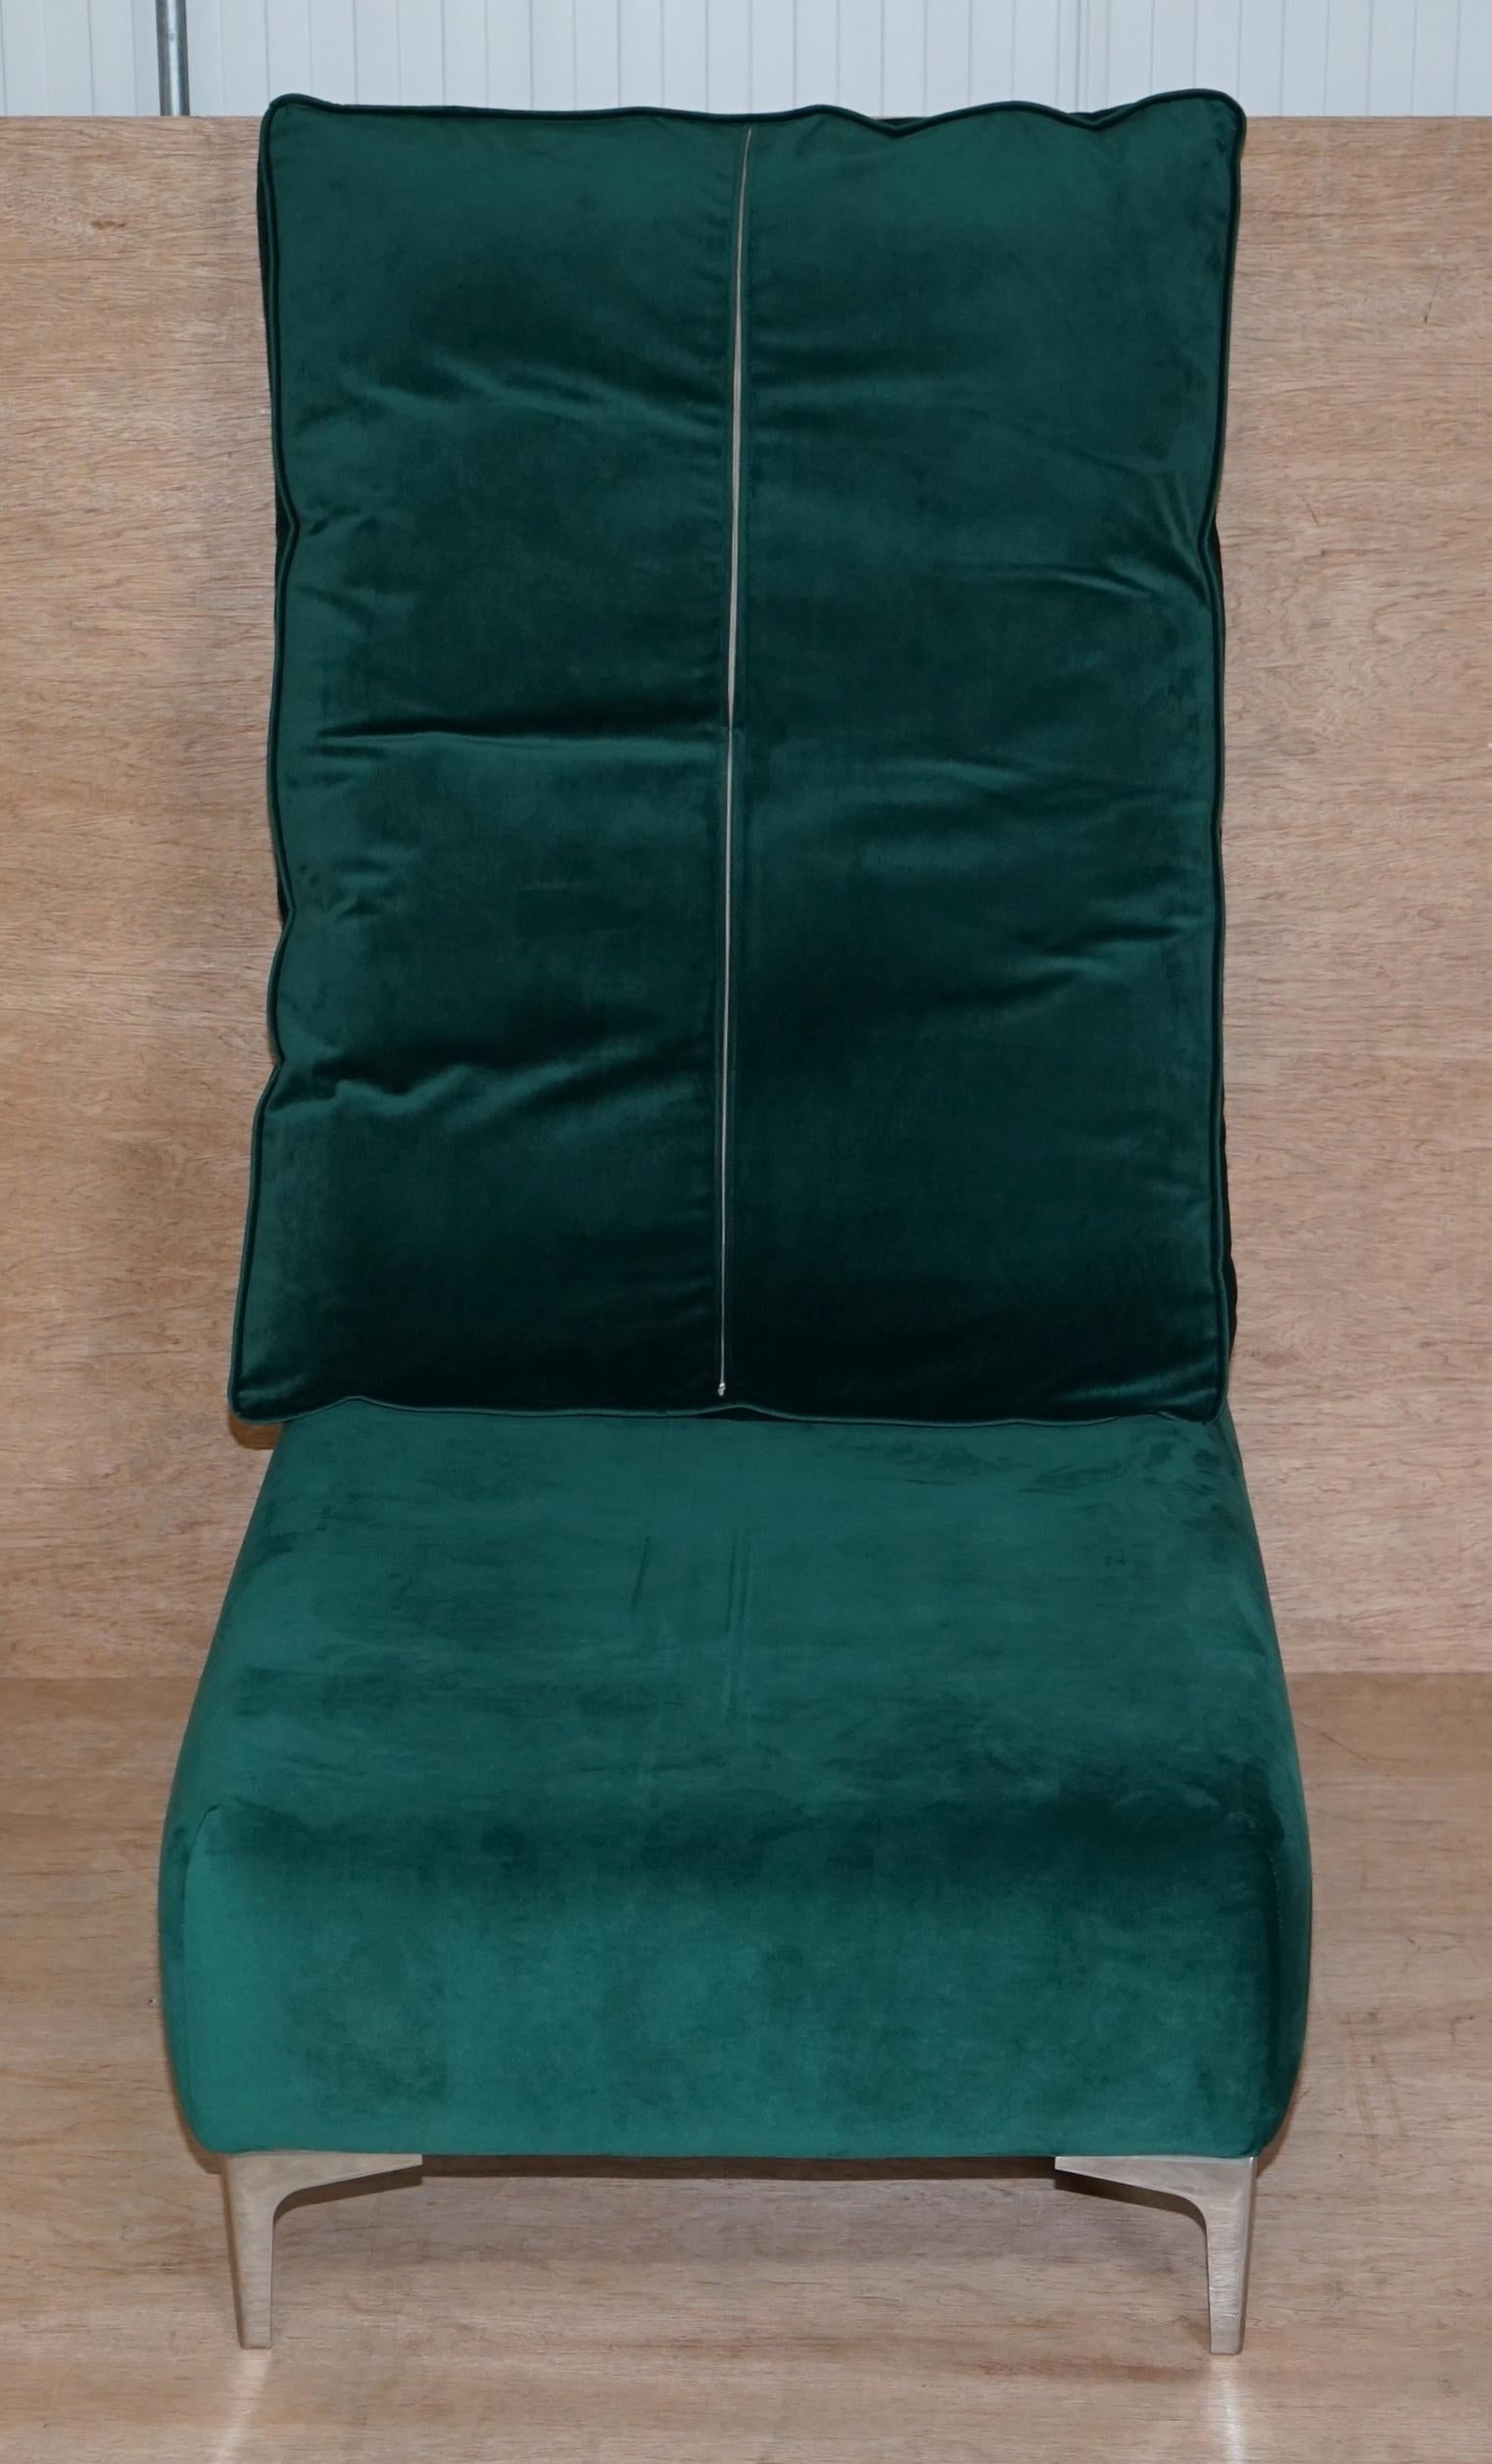 Stunning Ex Display Emerald Green Velvet Large Ottoman Footstool or Bench Seat For Sale 2